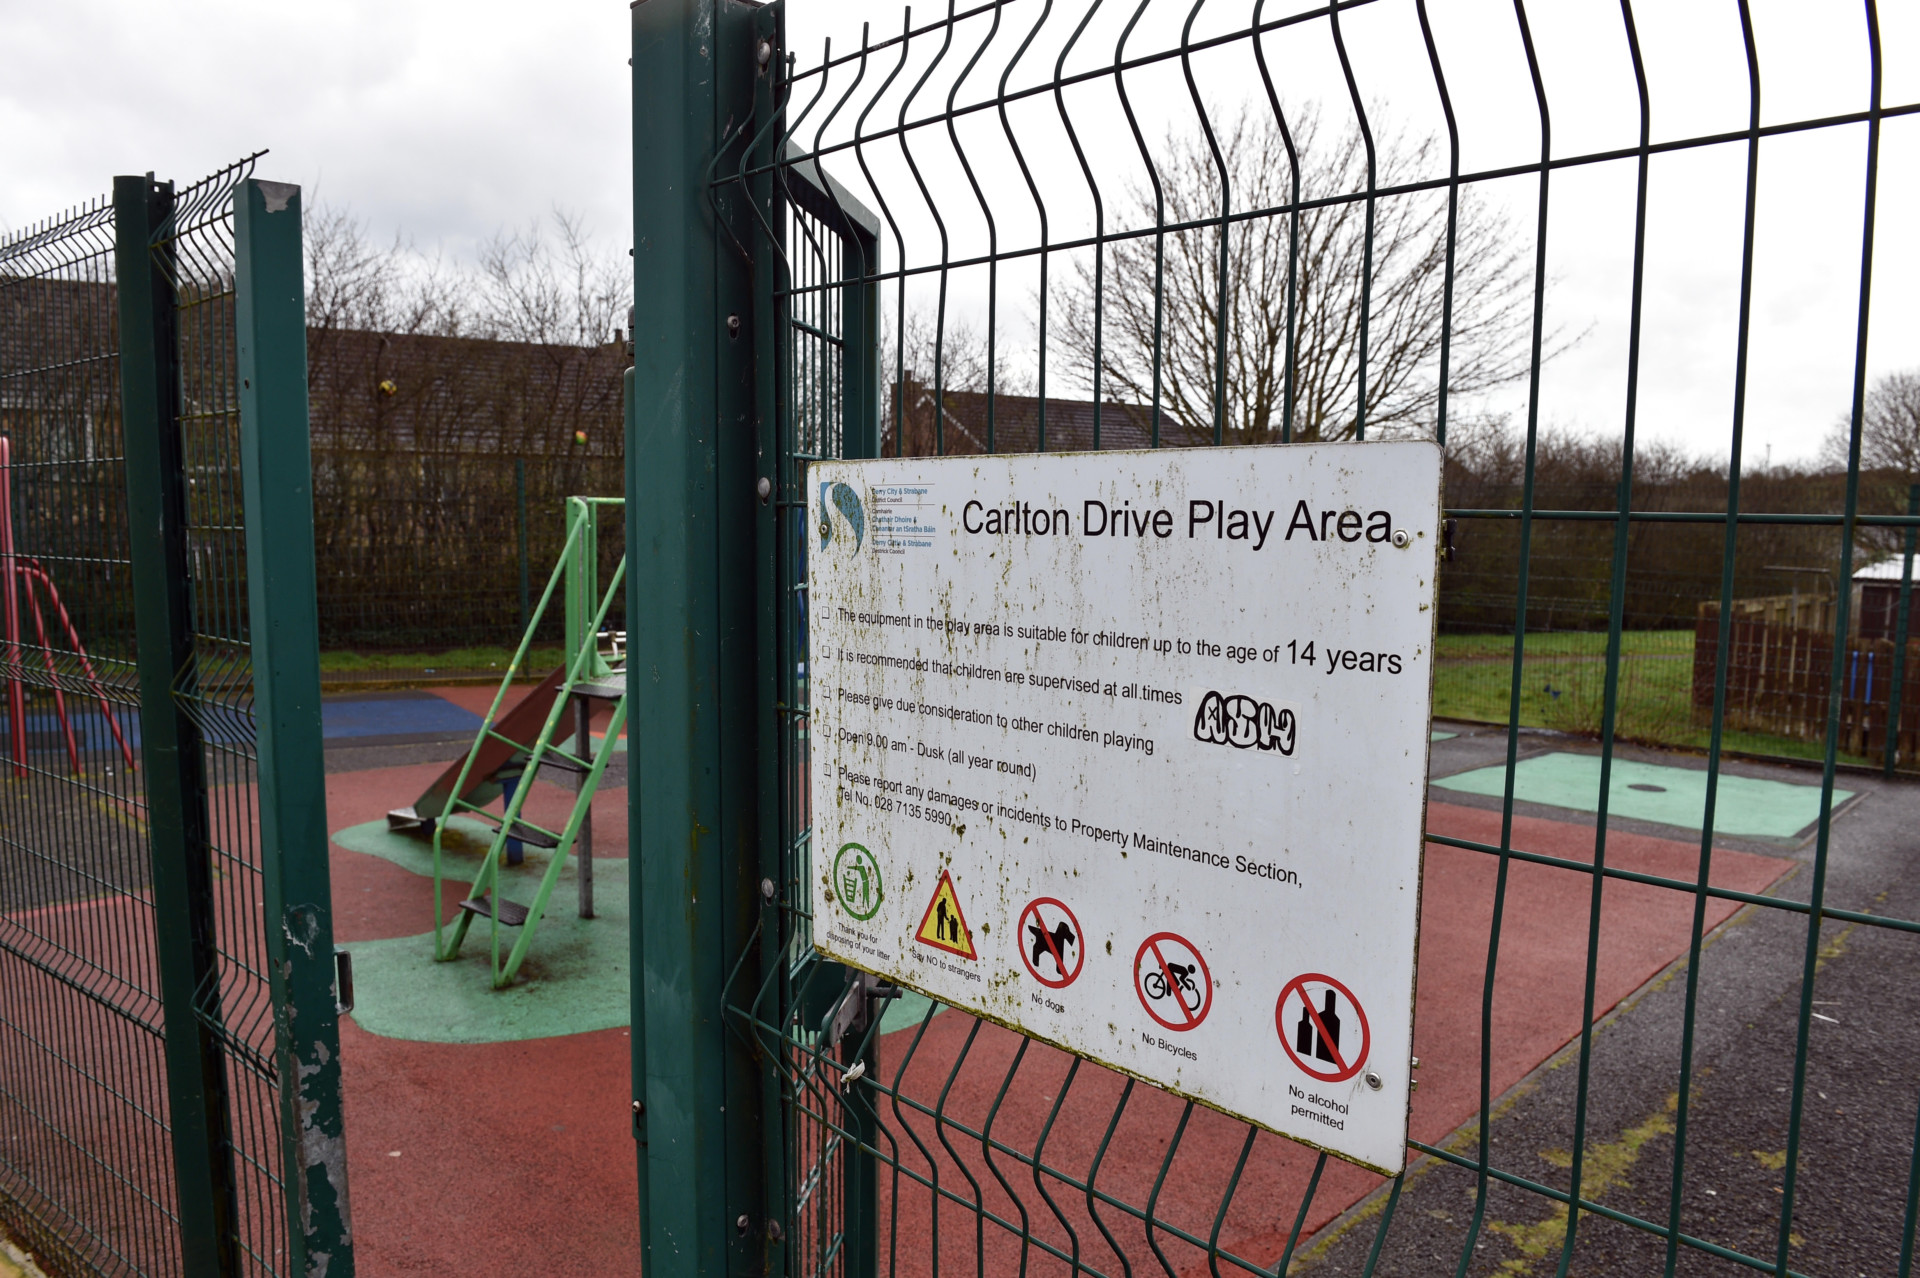 Carlton Drive residents appeal for help in play park situation